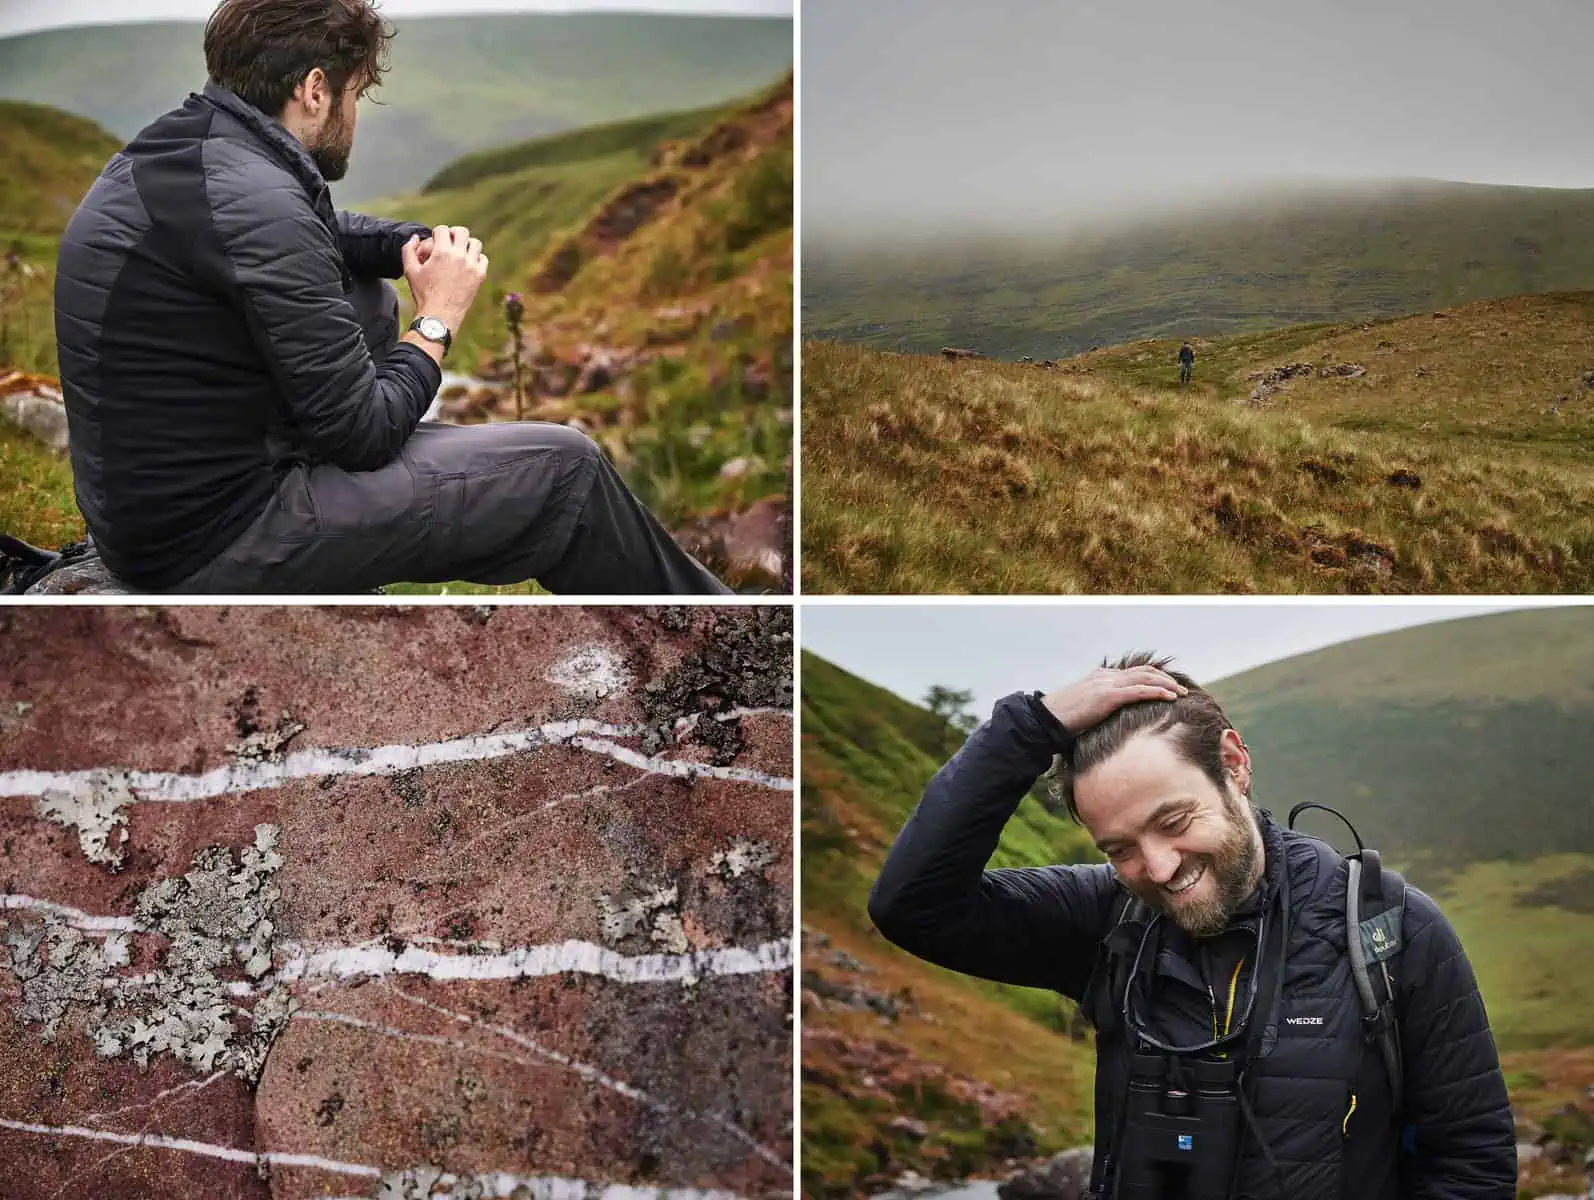 ID - clockwise from top left - 1: A landscape image. Matt sits on a rock with back to camera. He is holding his left wrist with his right and is looking into the distance. He wears black and grey clothes. In the background are mountains. 2: A landscape image. Matt is small in frame as he hikes down the side of a mountain hill. The mountain is cast in thick cloud so you can’t see the top. 3: A landscape image. A close up of Matt who is facing the camera. He is sweeping his hair over his head and out his eyes and is smiling. He is wearing a black coat, grey bag, sunglasses and has binoculars around his neck. 4: A landscape image. A close up detail of a rock which is red and has elements of lichen growing on it. There are white lines across the rock creating interesting patterns.